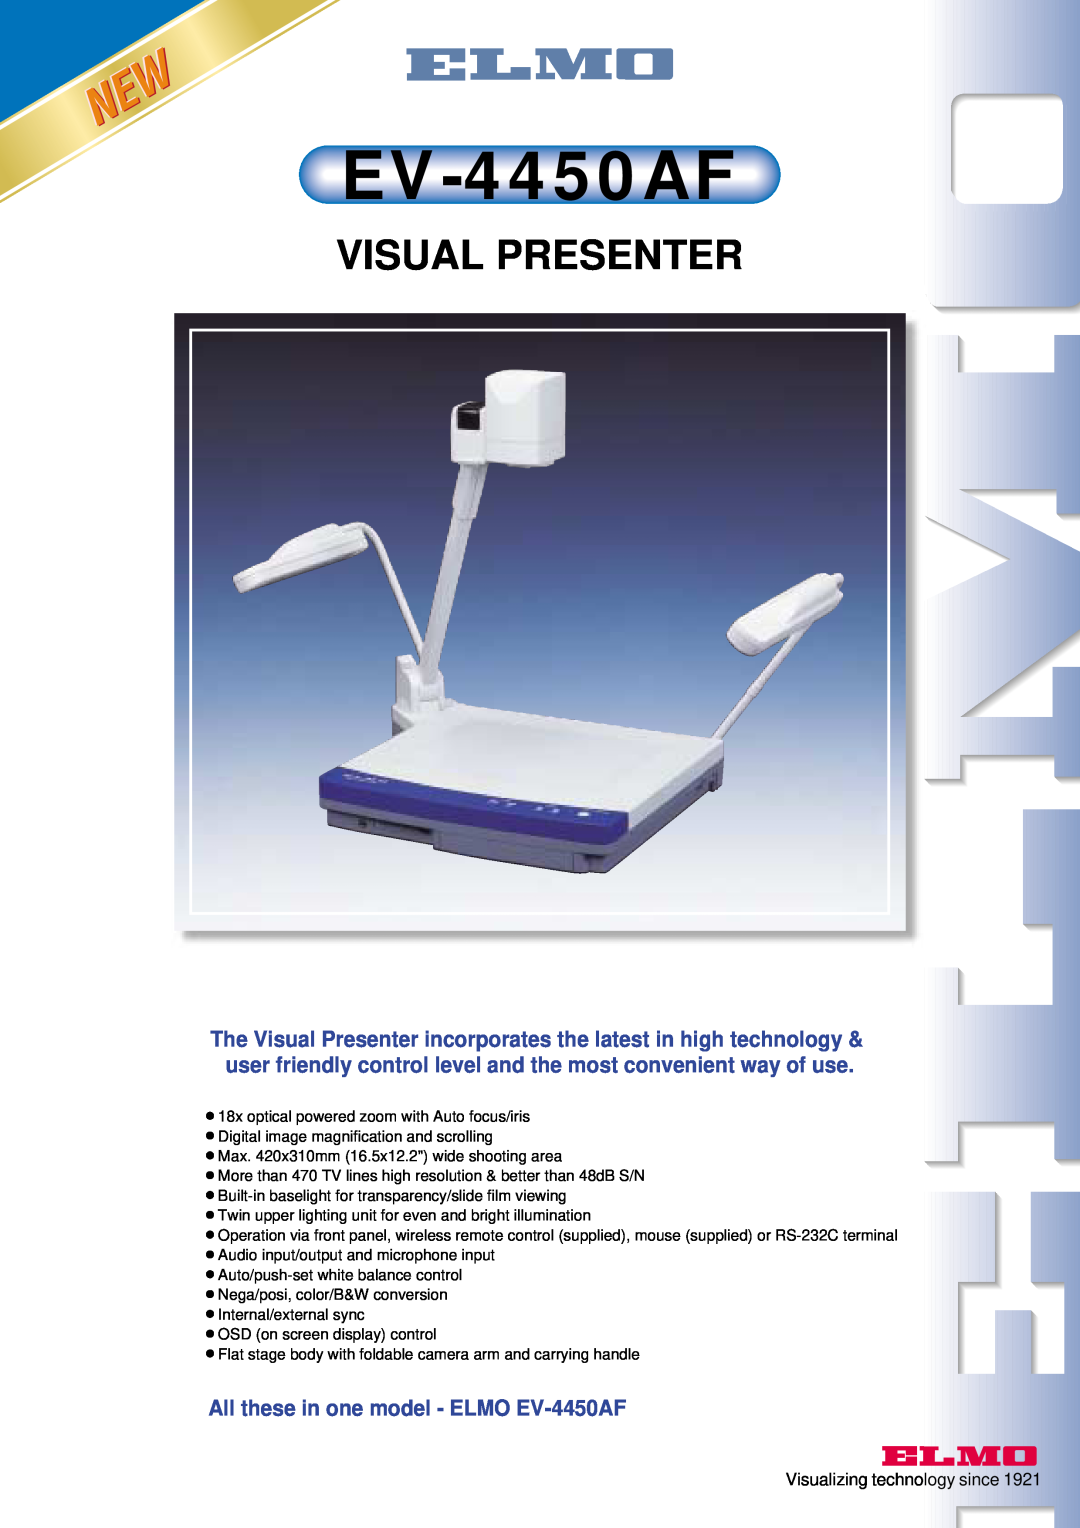 Elmo manual Visual Presenter, All these in one model - ELMO EV-4450AF, Visualizing technology since 